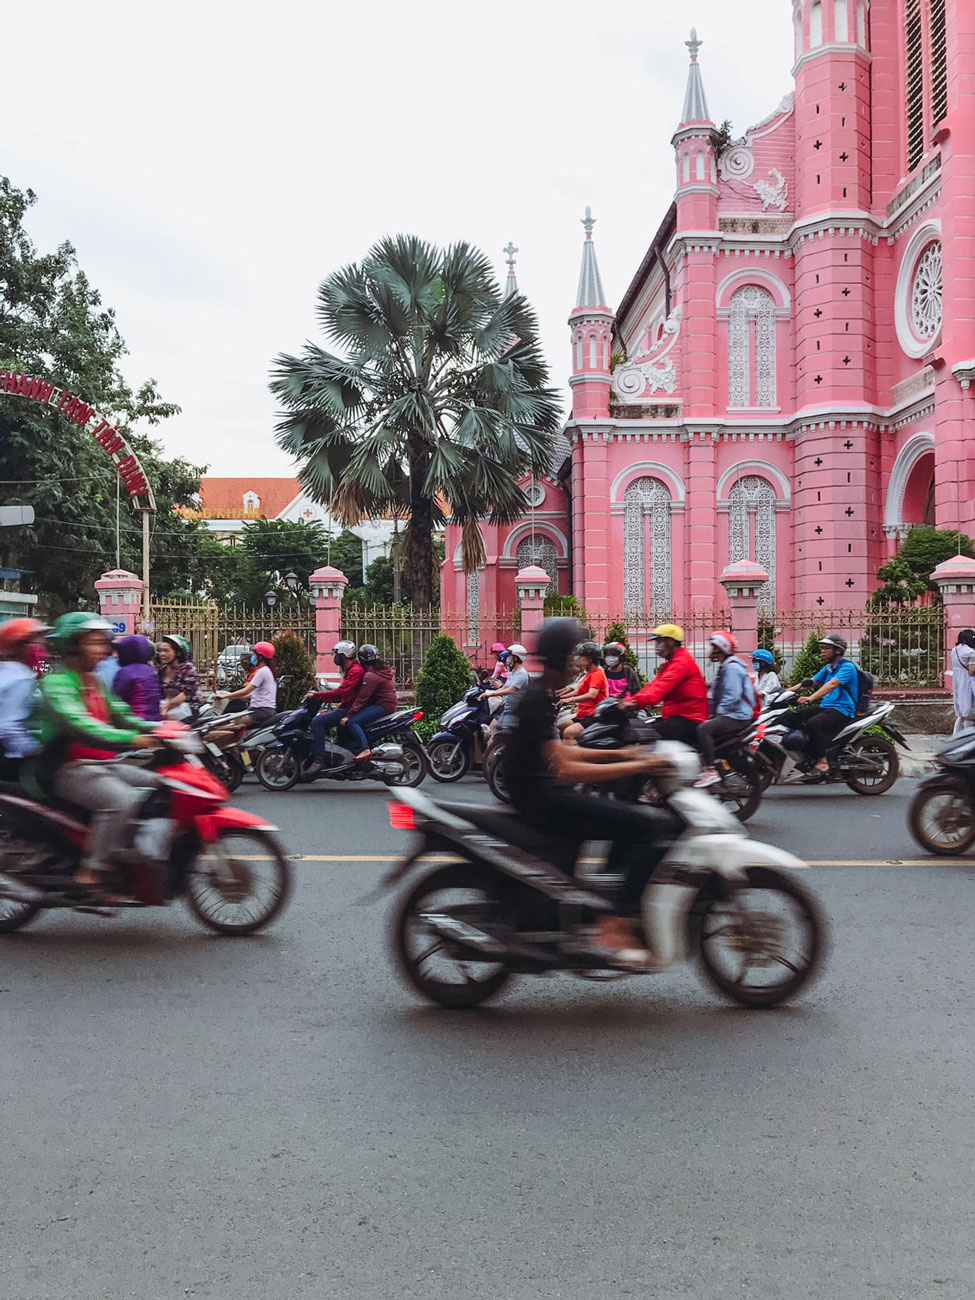 The hustle and bustle of the streets of Ho Chi Minh City.